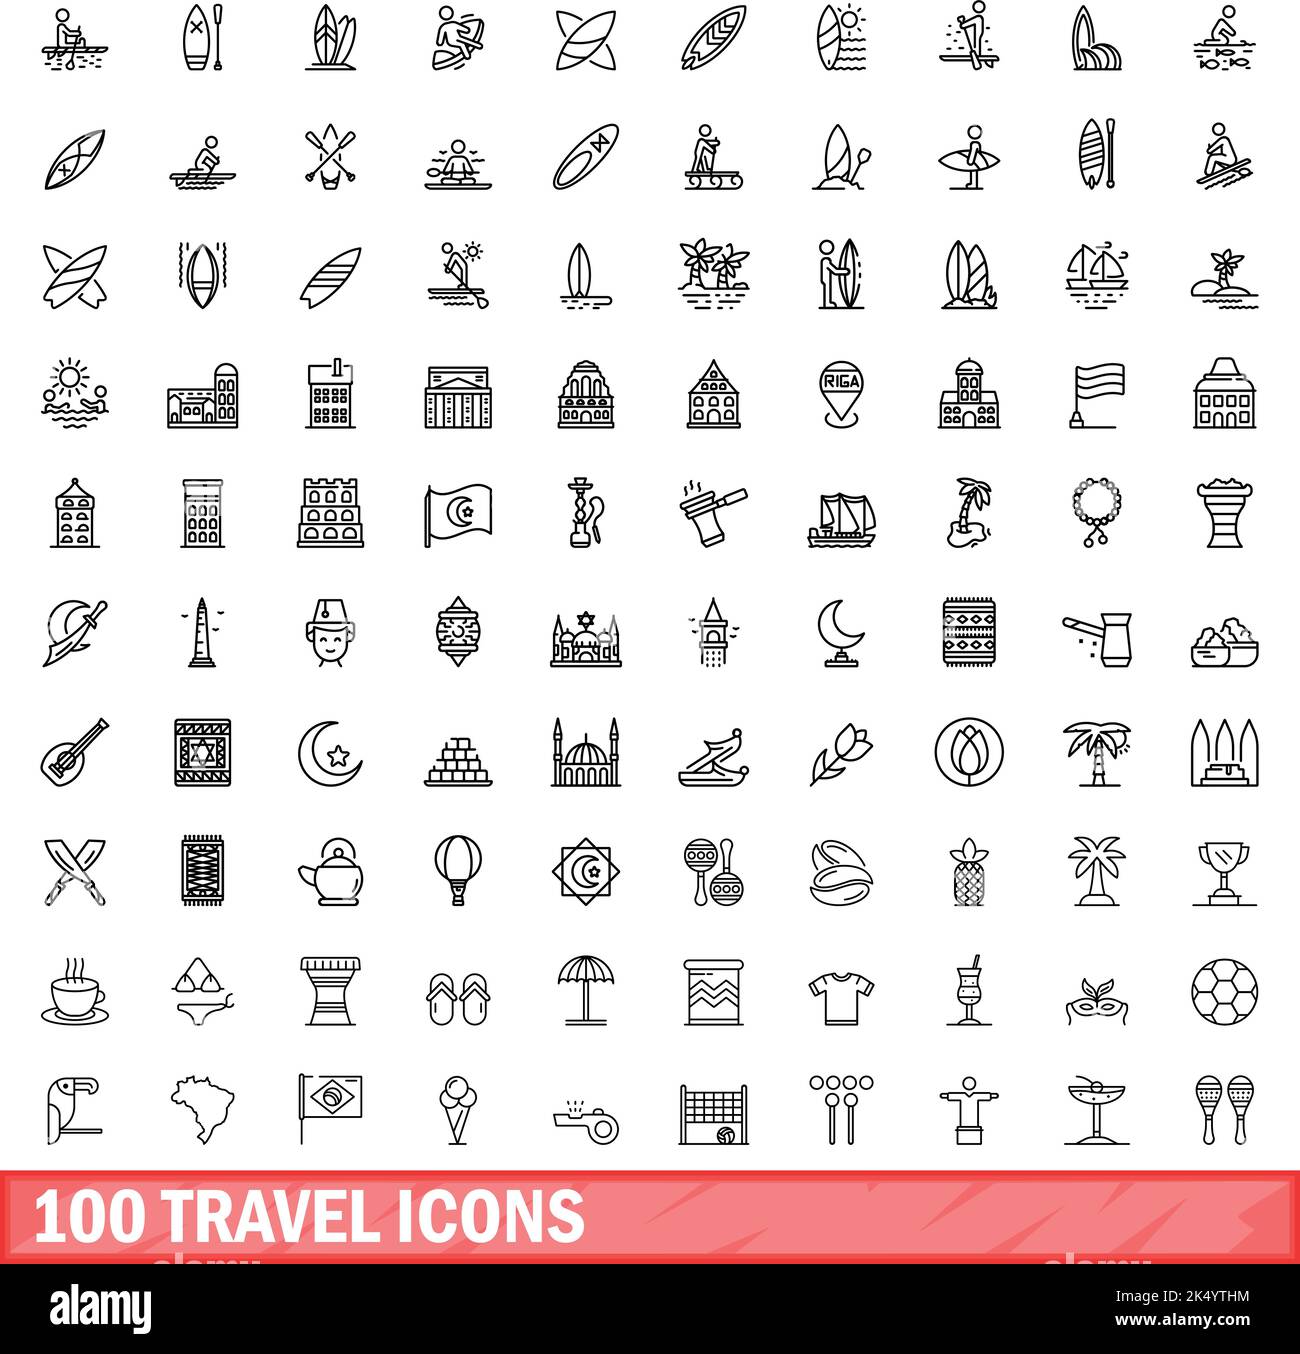 100 travel icons set. Outline illustration of 100 travel icons vector set isolated on white background Stock Vector